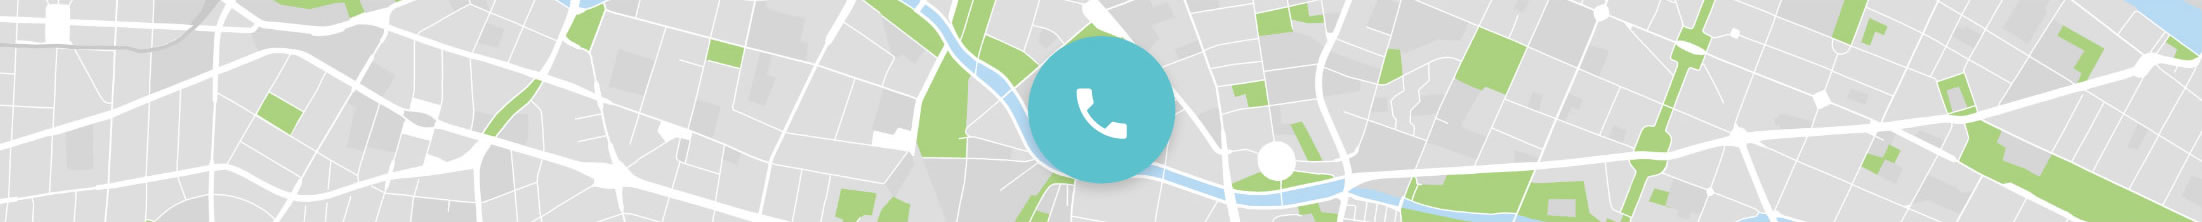 blue phone icon on map